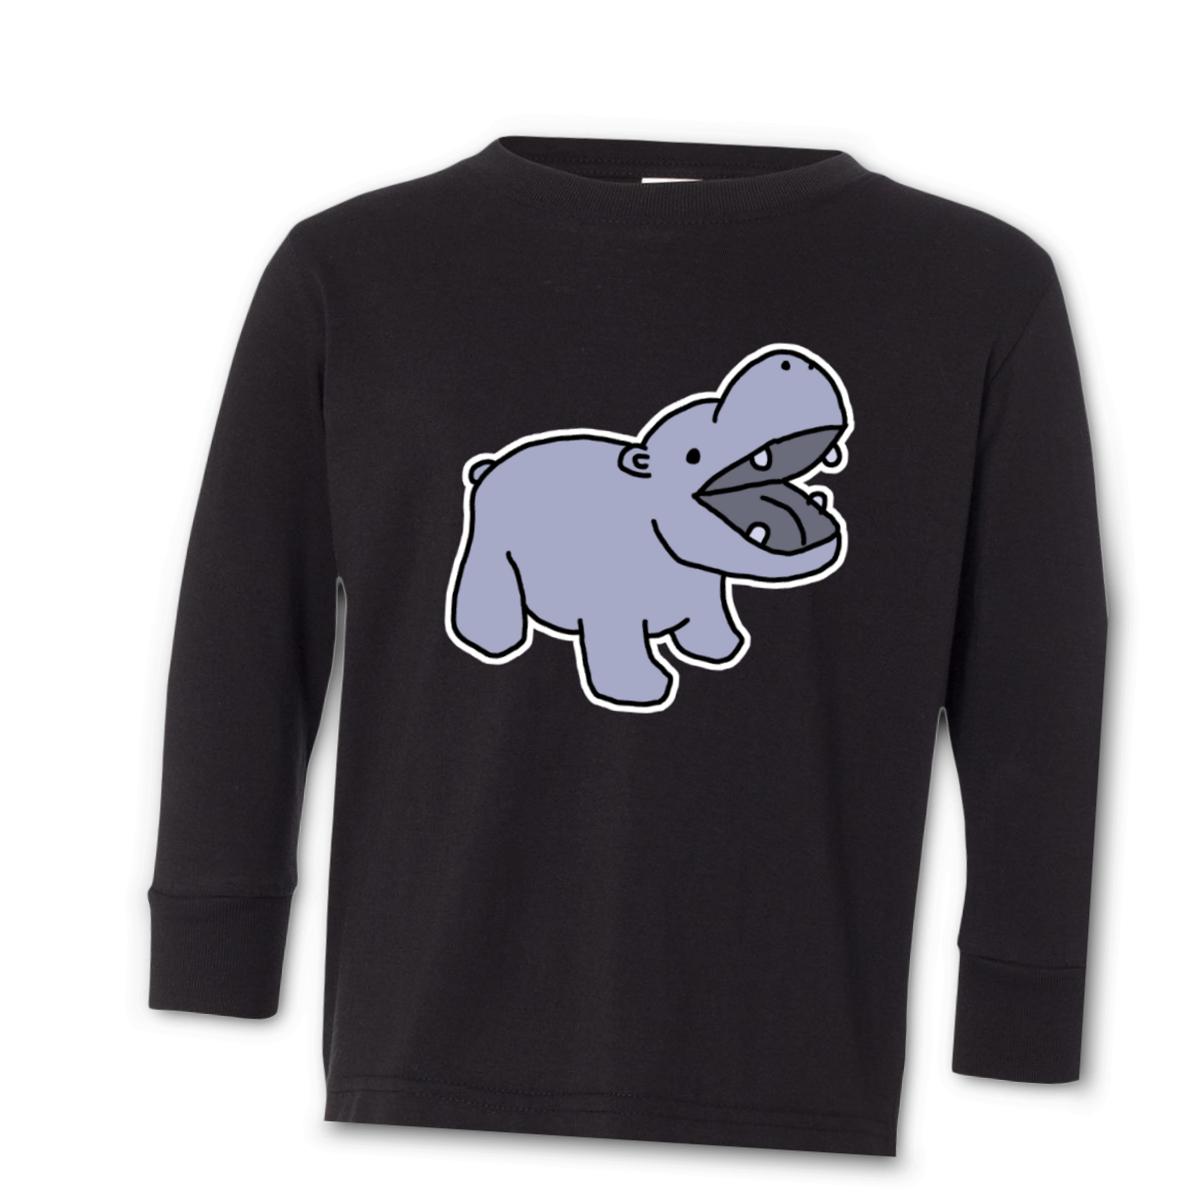 Toy Hippo Toddler Long Sleeve Tee 56T black